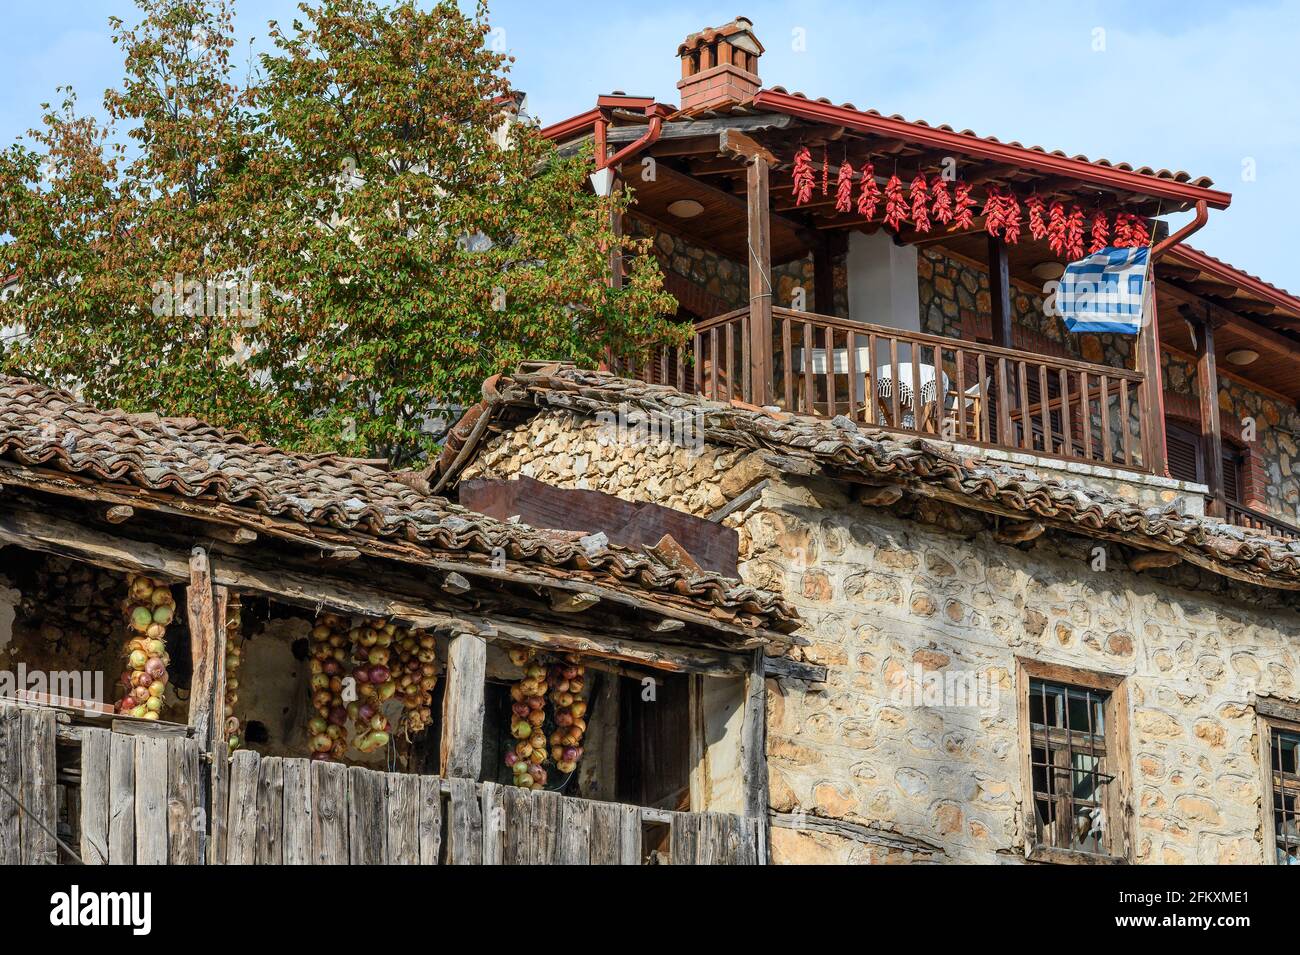 Chilli peppers, onions and a Greek flag flying, on the balconies of houses in the fishing village of Psarades on Lake Prespa, Macedonia, Northern Gree Stock Photo